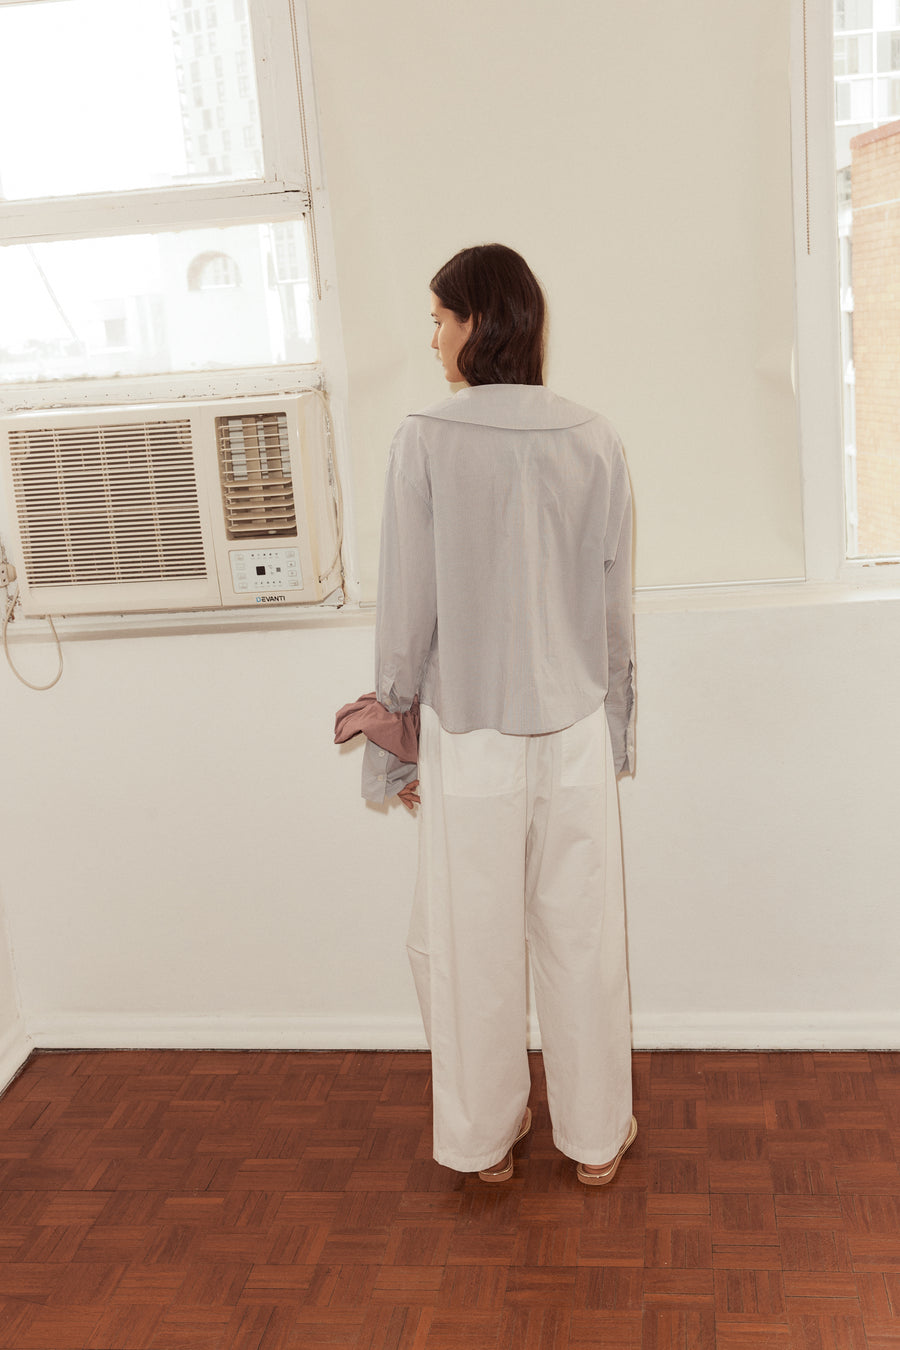 Back shot of female model wearing the Oversized Collared Shirt in Dream Stripe, Bartack Pants in White. Collar flips down over shoulders in a soft curve.Model stands in from of an old air conditioner lodged in the wall.